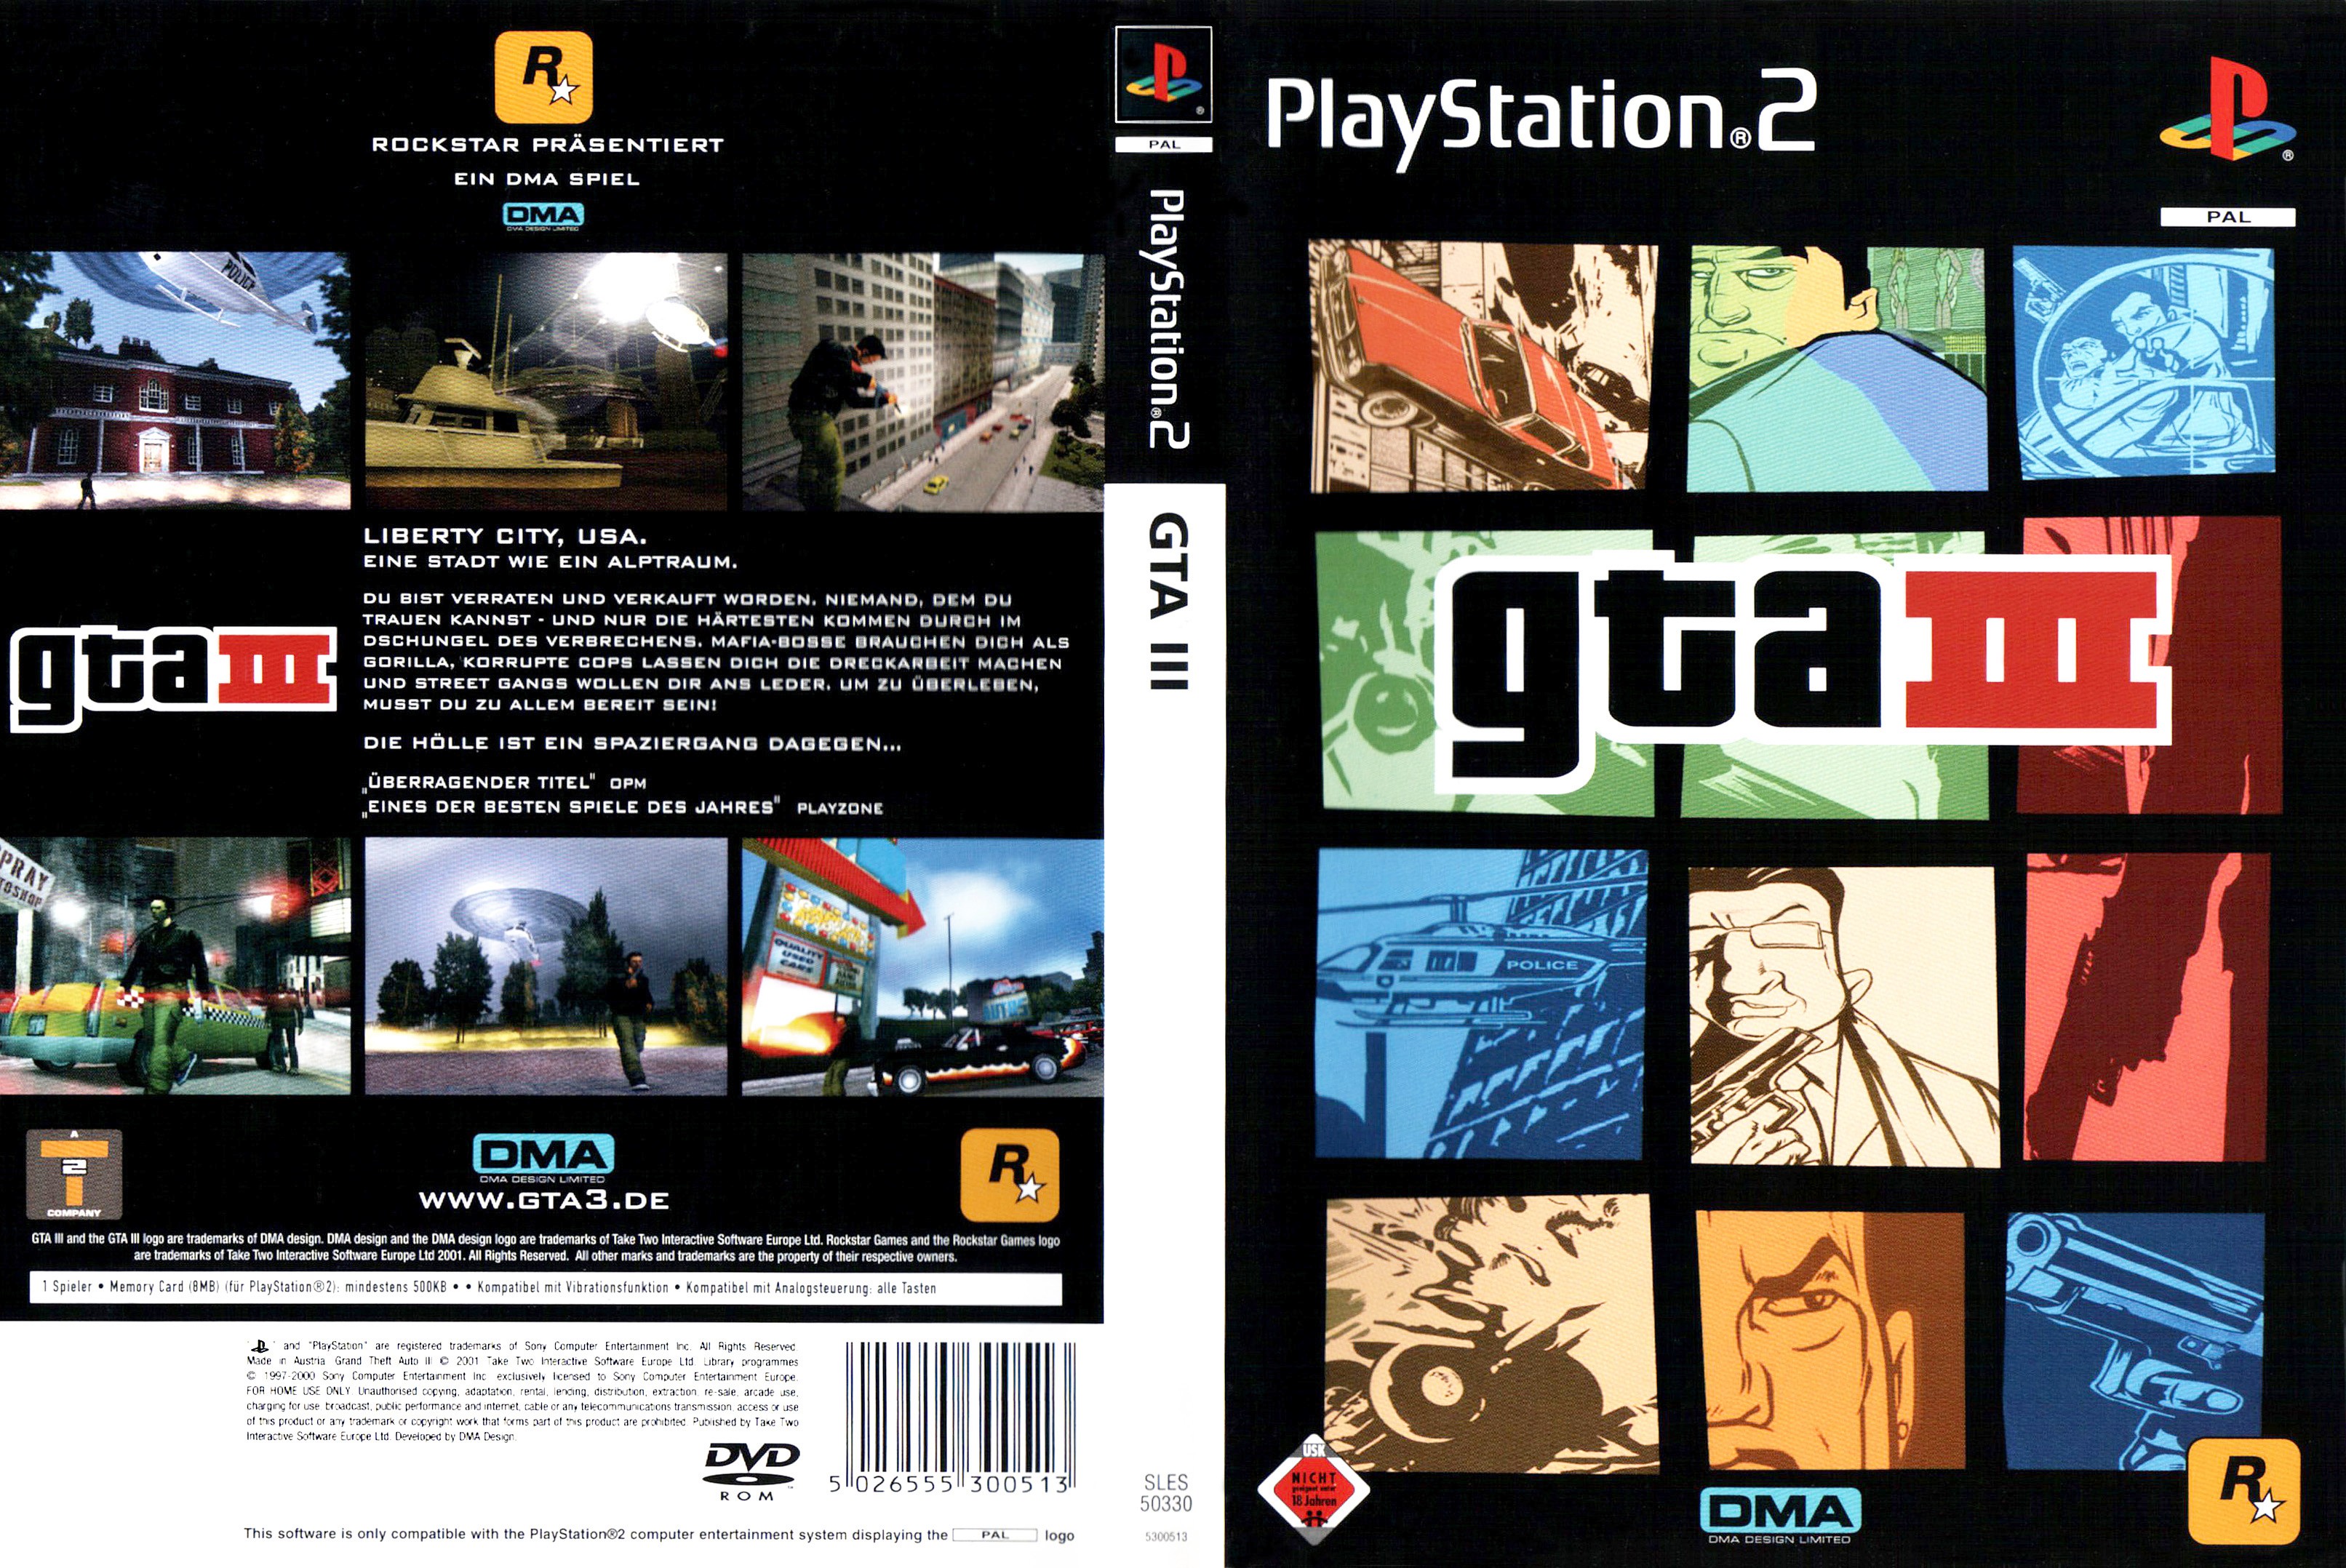 grand-theft-auto-iii-ps2-cover